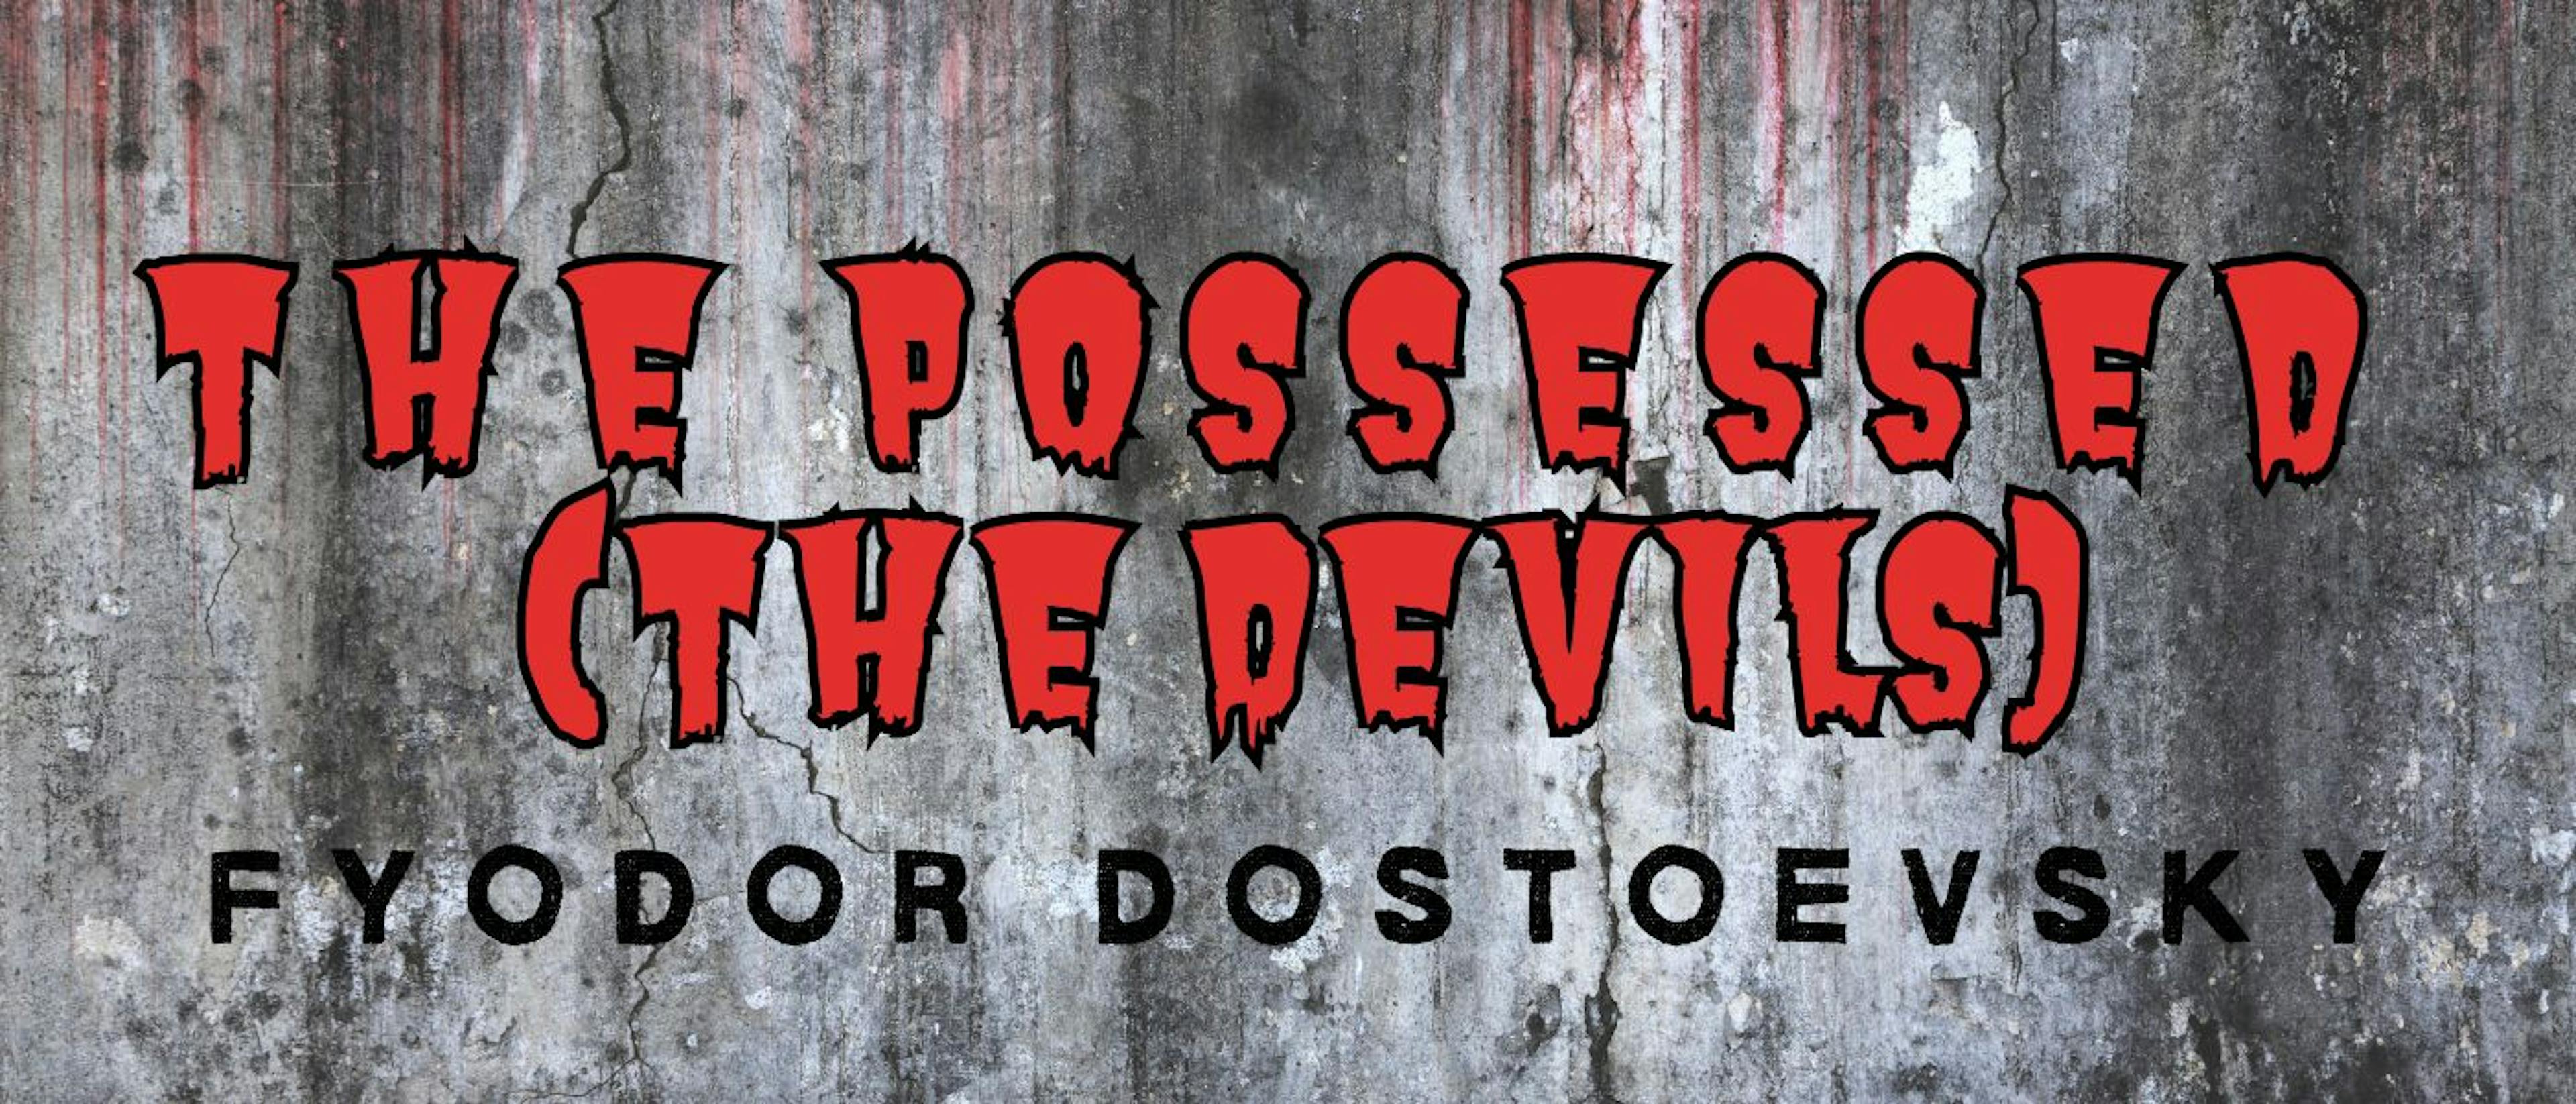 featured image - The Possessed (The Devils) by Fyodor Dostoyevsky - Table of Links